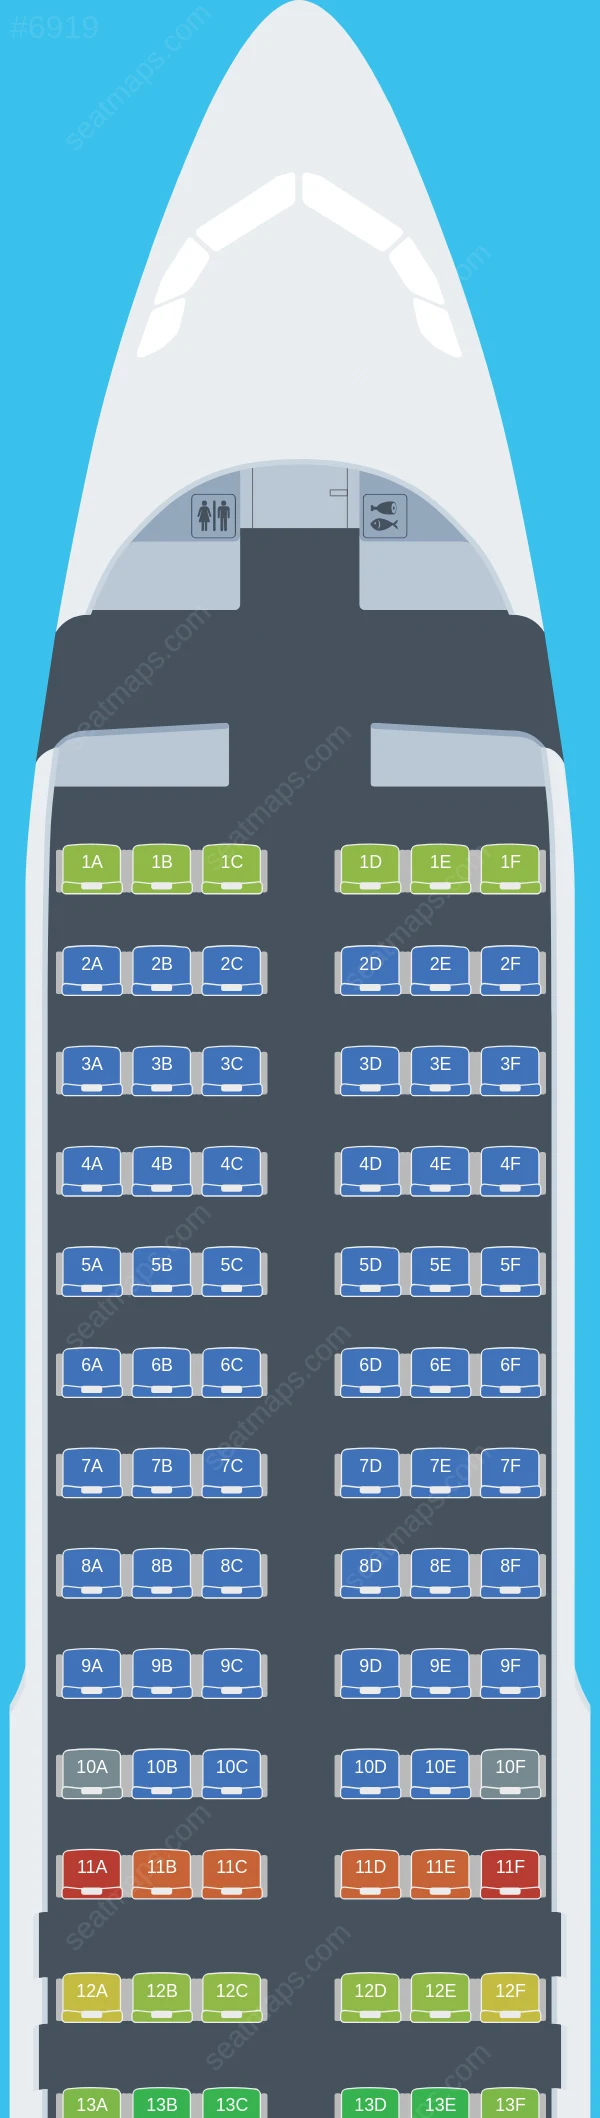 HK Express Airbus A320neo seatmap preview